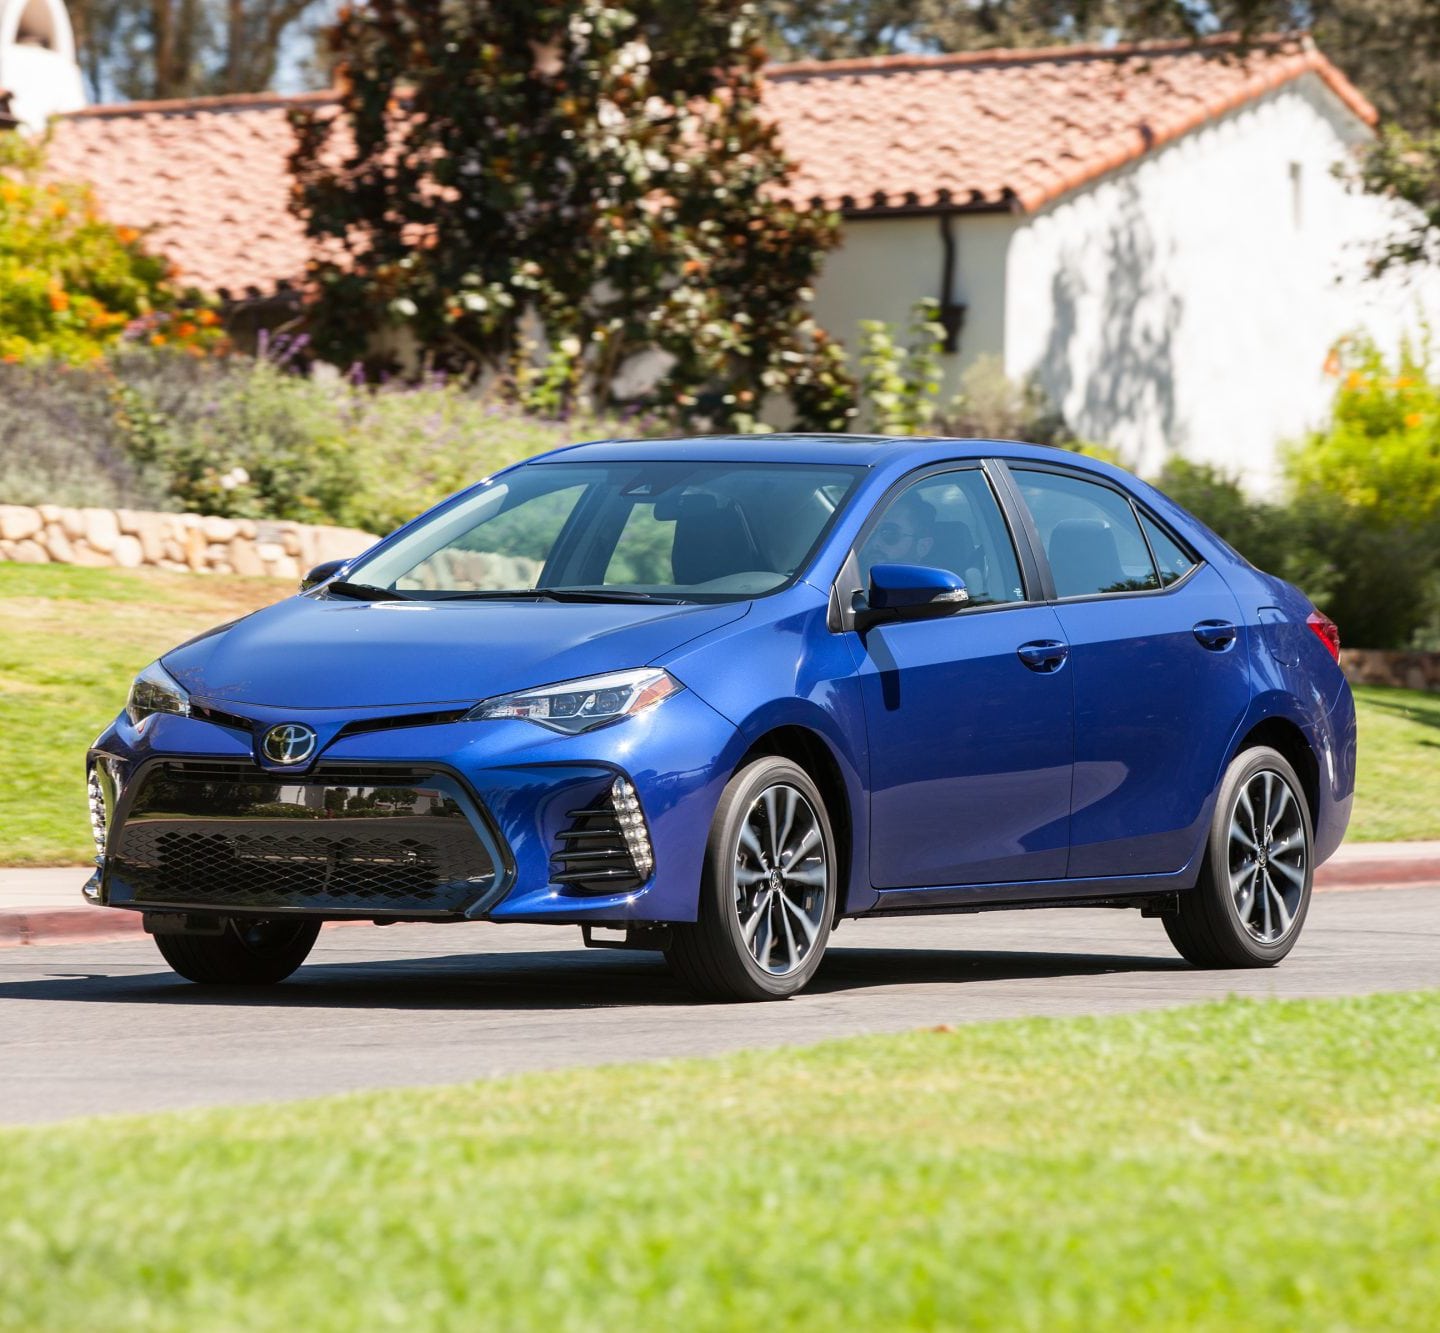 2018 Toyota Corolla Aims To Up the Game In Safety